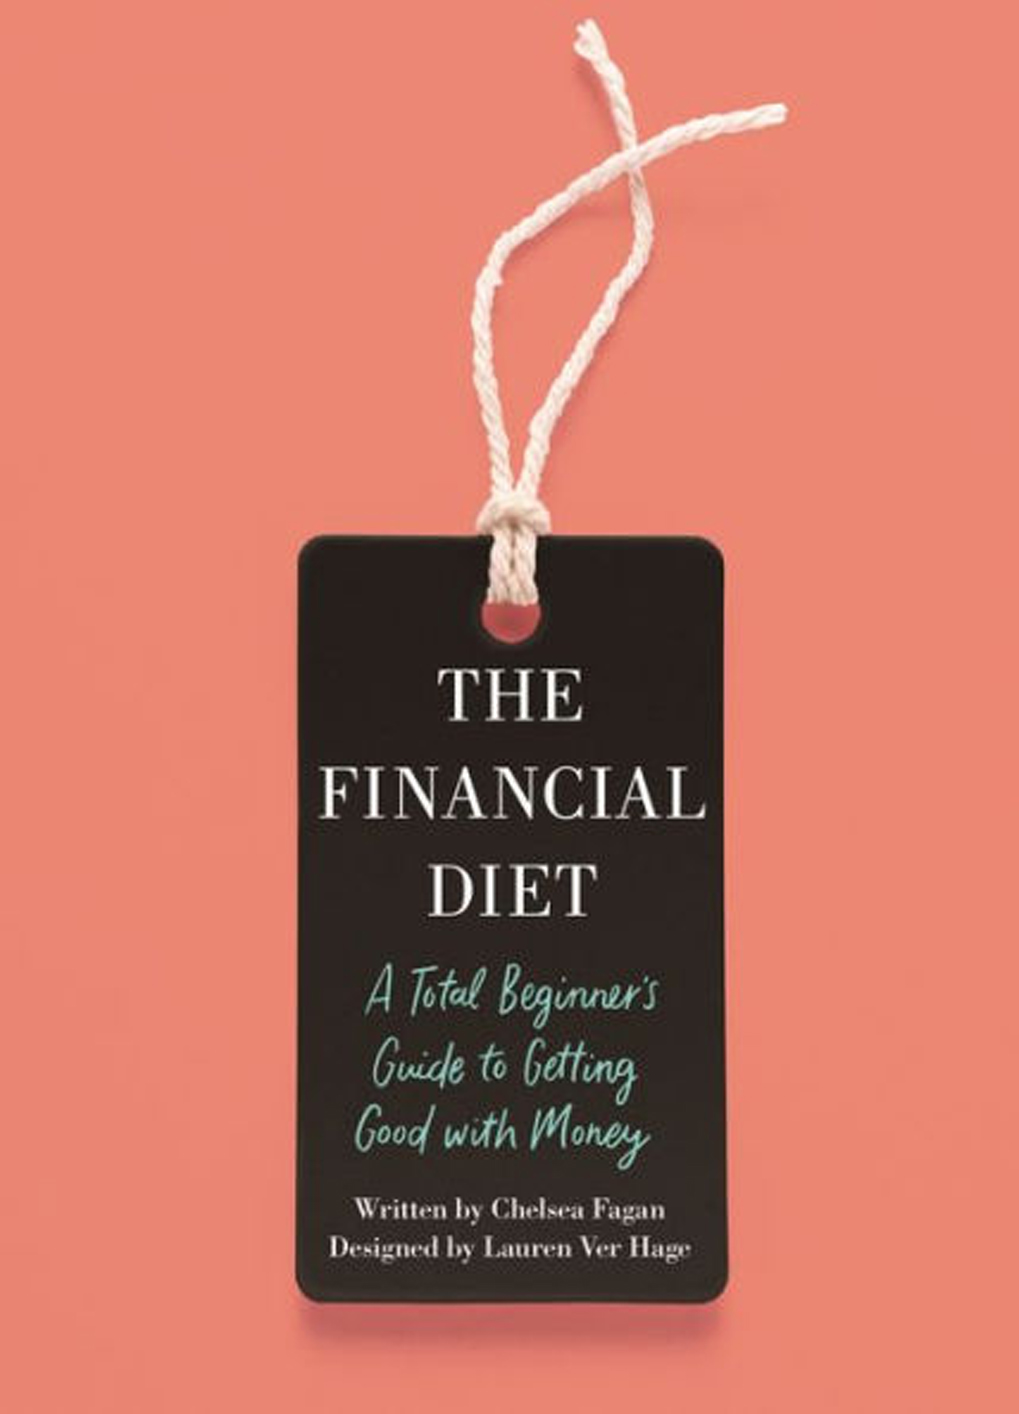 make-2018-your-year-with-these-books-the-financial-diet